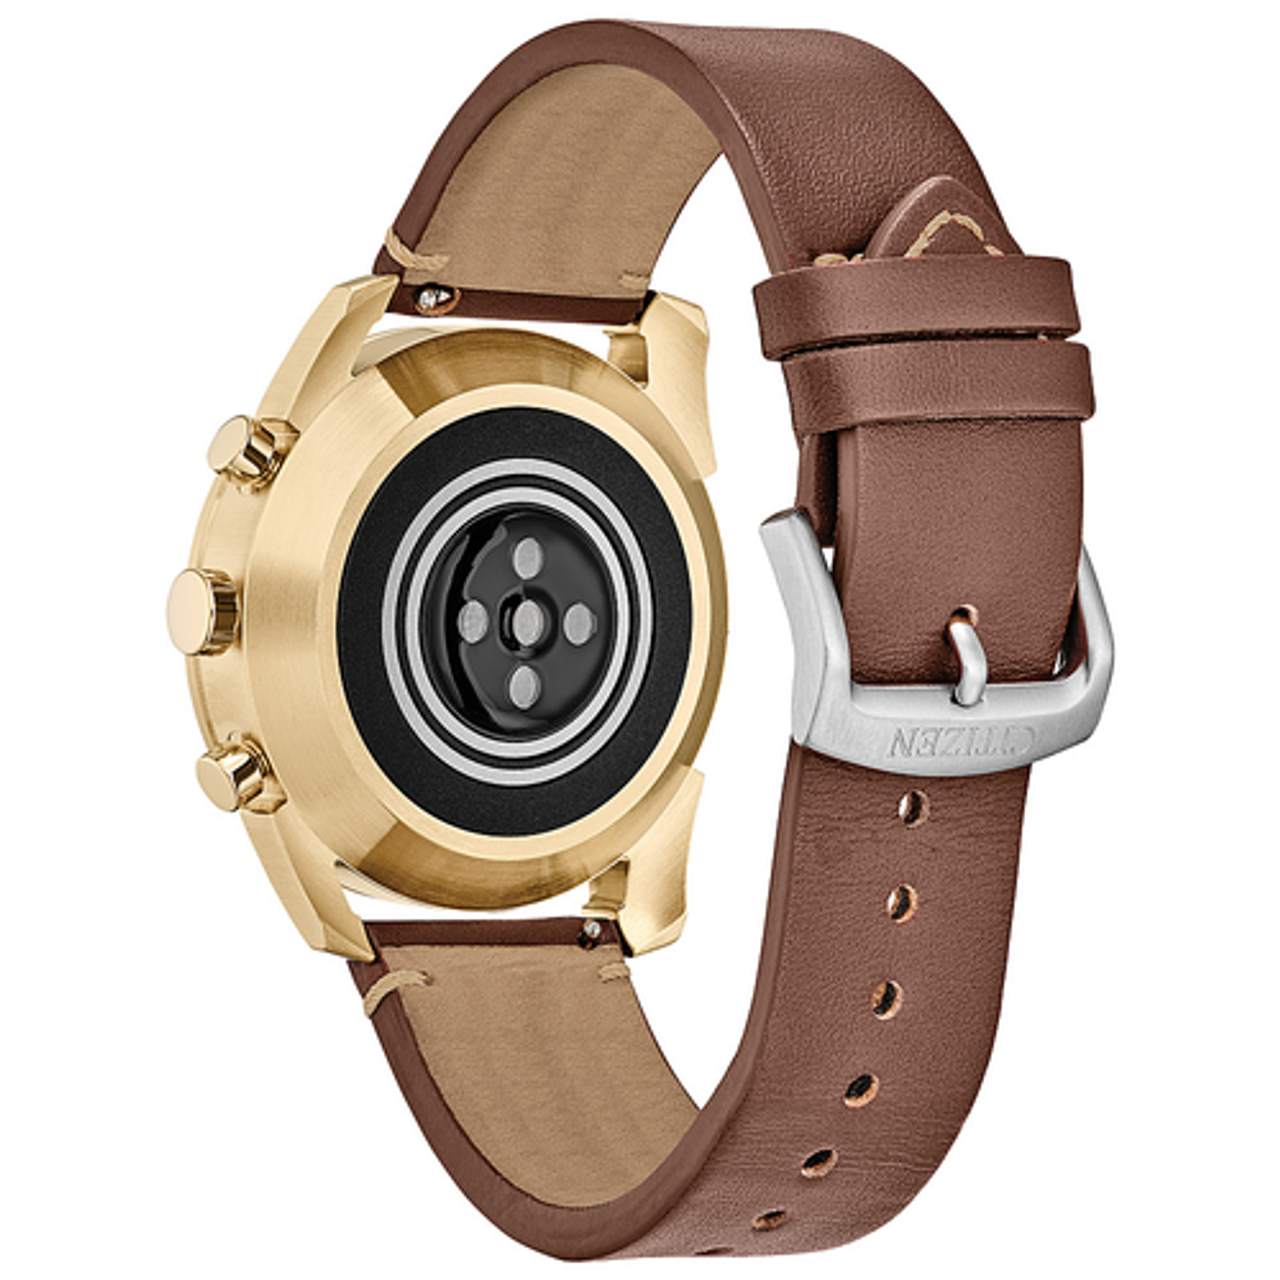 Citizen - CZ Smart Unisex Hybrid 42.5mm Goldtone IP Stainless Steel Smartwatch with Brown Leather Strap